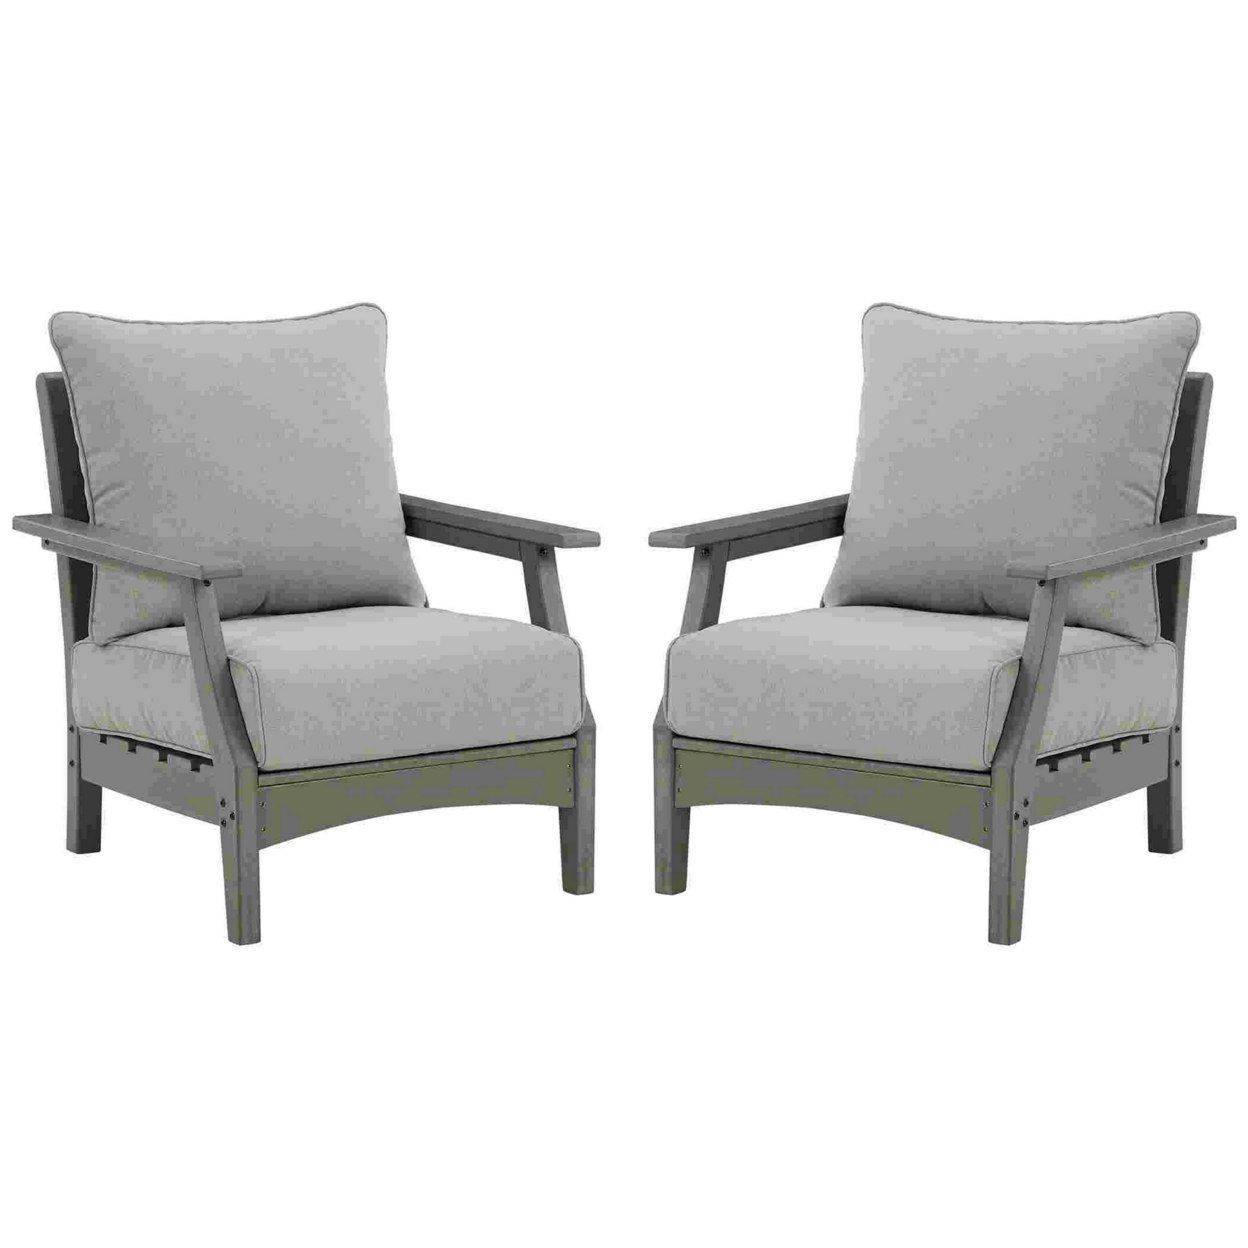 Outdoor Lounge Chair With Slatted Design And Cushions, Set Of 2, Gray- Saltoro Sherpi